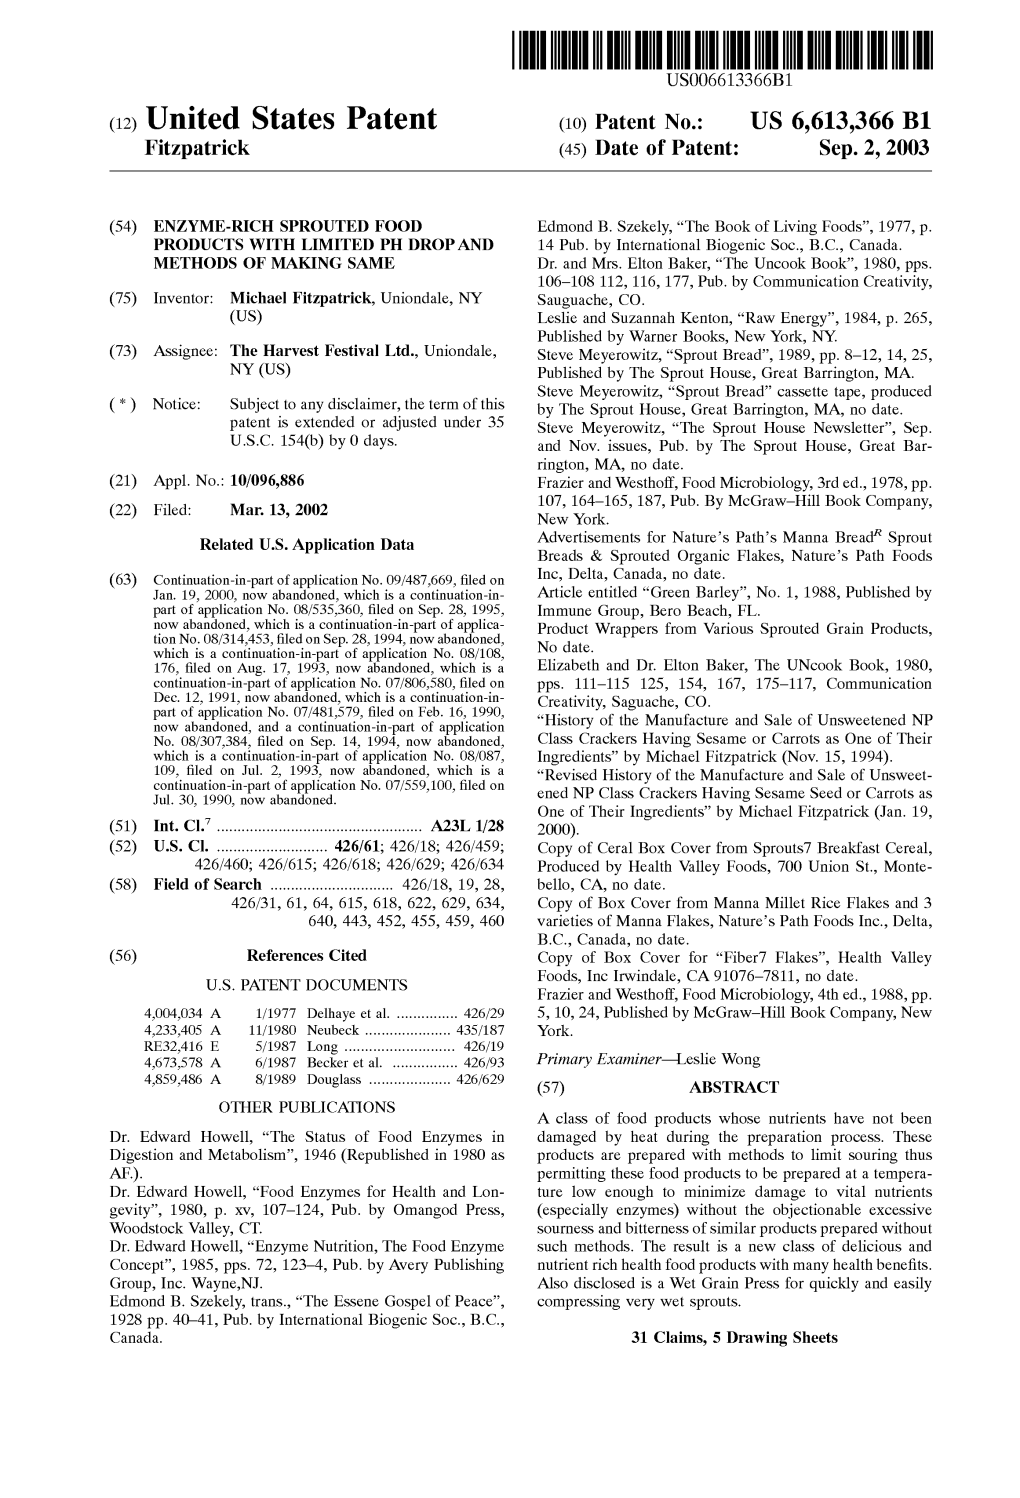 (12) United States Patent (10) Patent No.: US 6,613,366 B1 Fitzpatrick (45) Date of Patent: Sep